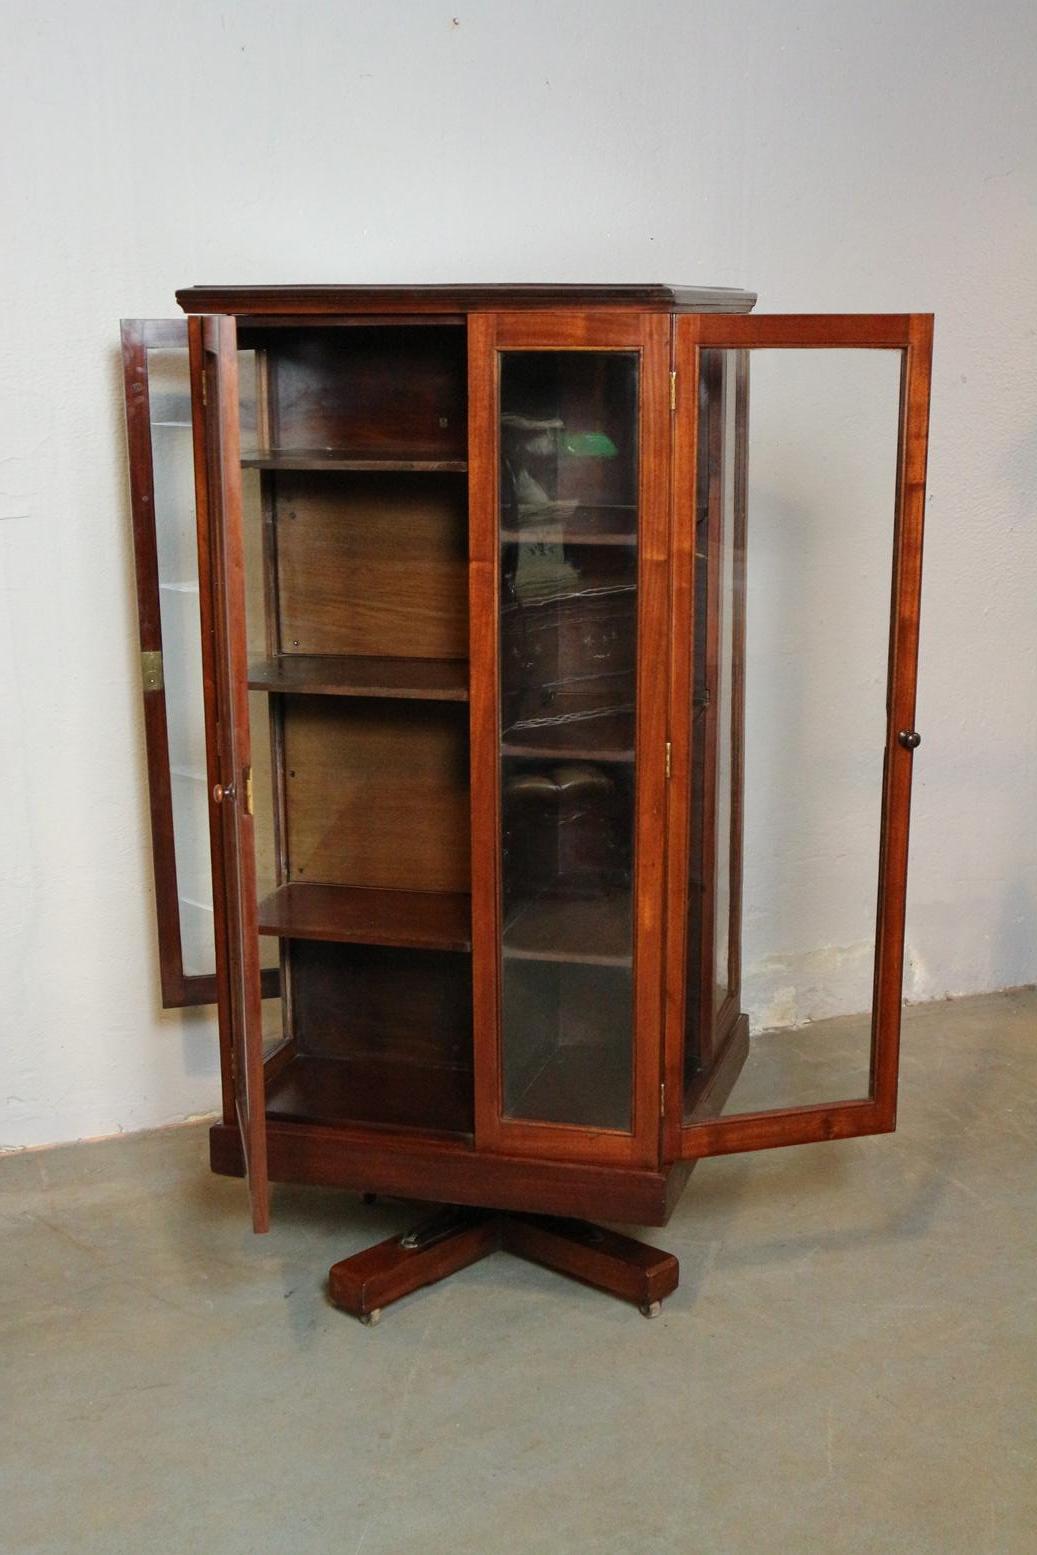 Special mahogany bookcase with 4 glass doors. Cast iron base. In good condition.
Can also be used as a display cabinet.
Origin: England
Period: circa 1900
Size: 66cm x 66cm x H 149cm.